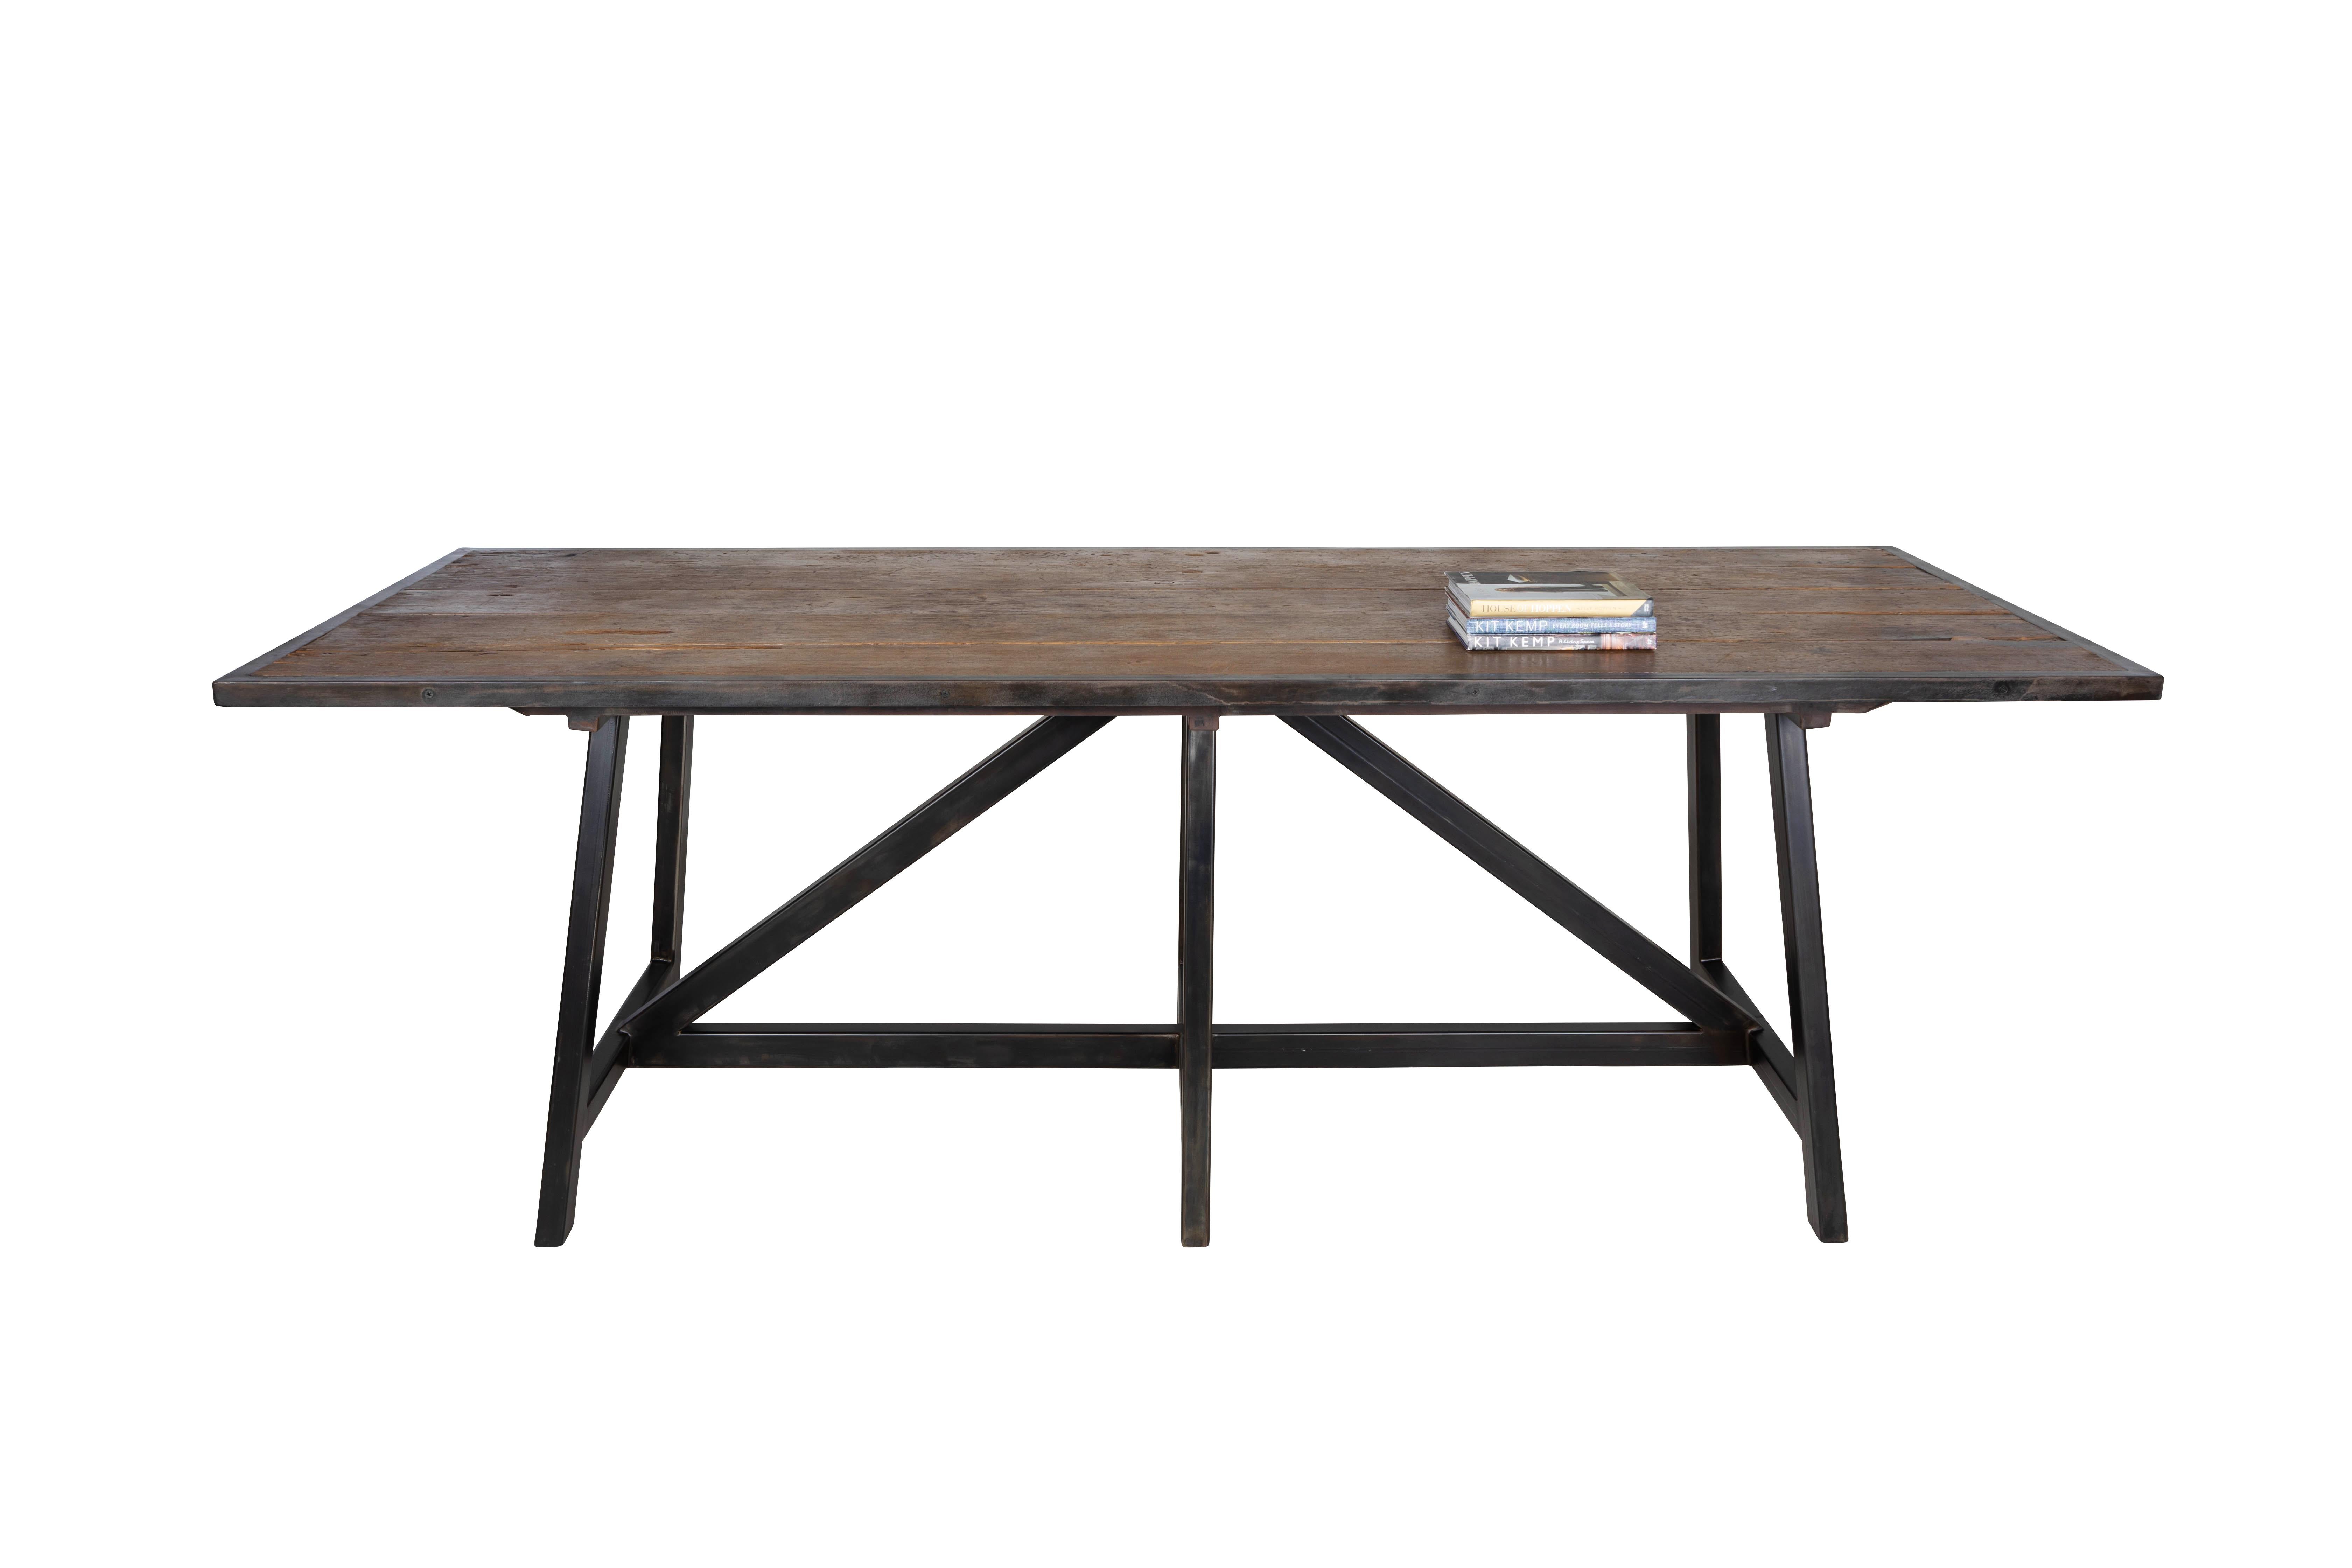 Bar height floating center island table. Vintage elm and steel banded top. On ebony patina angled base.

The piece is a part of our one-of-a-kind collection, Le Monde. Exclusive to Brendan Bass. 

Globally curated by Brendan Bass, Le Monde